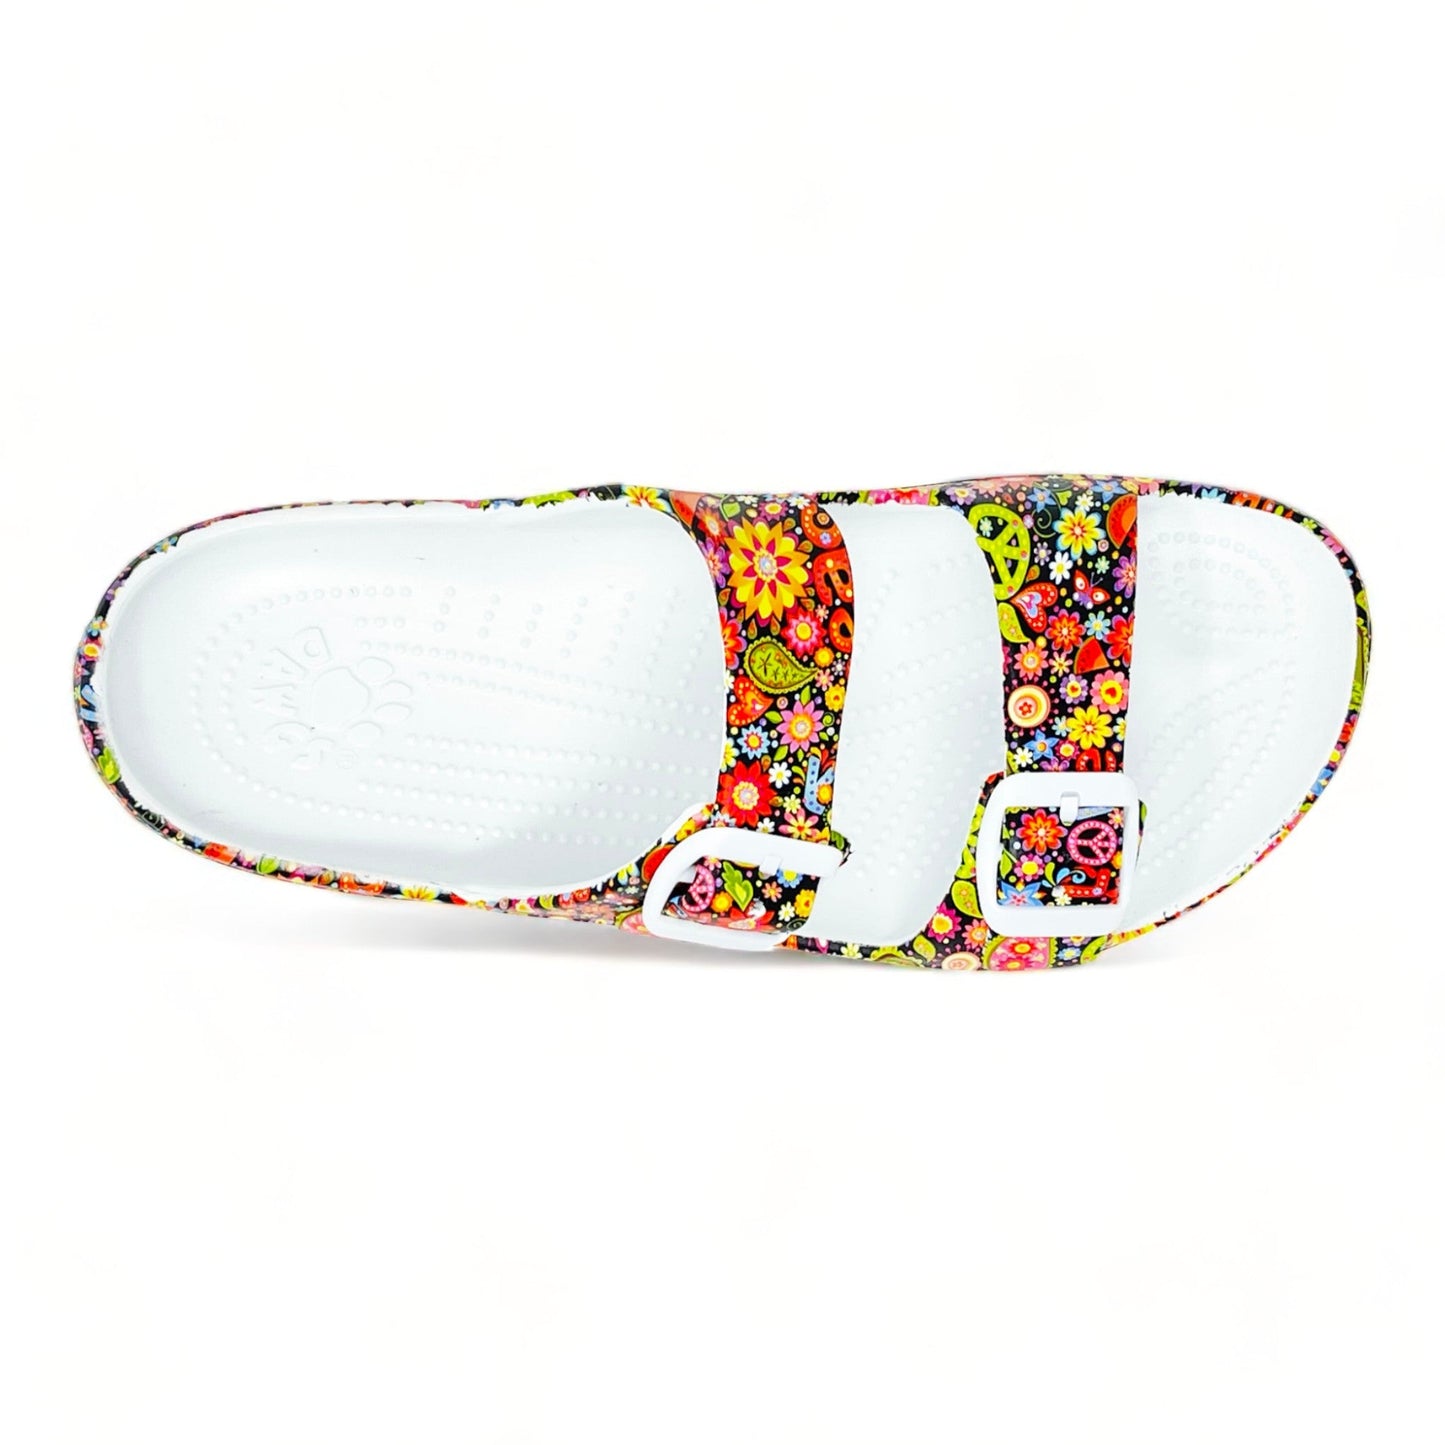 Women's PAW Print Adjustable 2-Strap Sandals by DAWGS USA